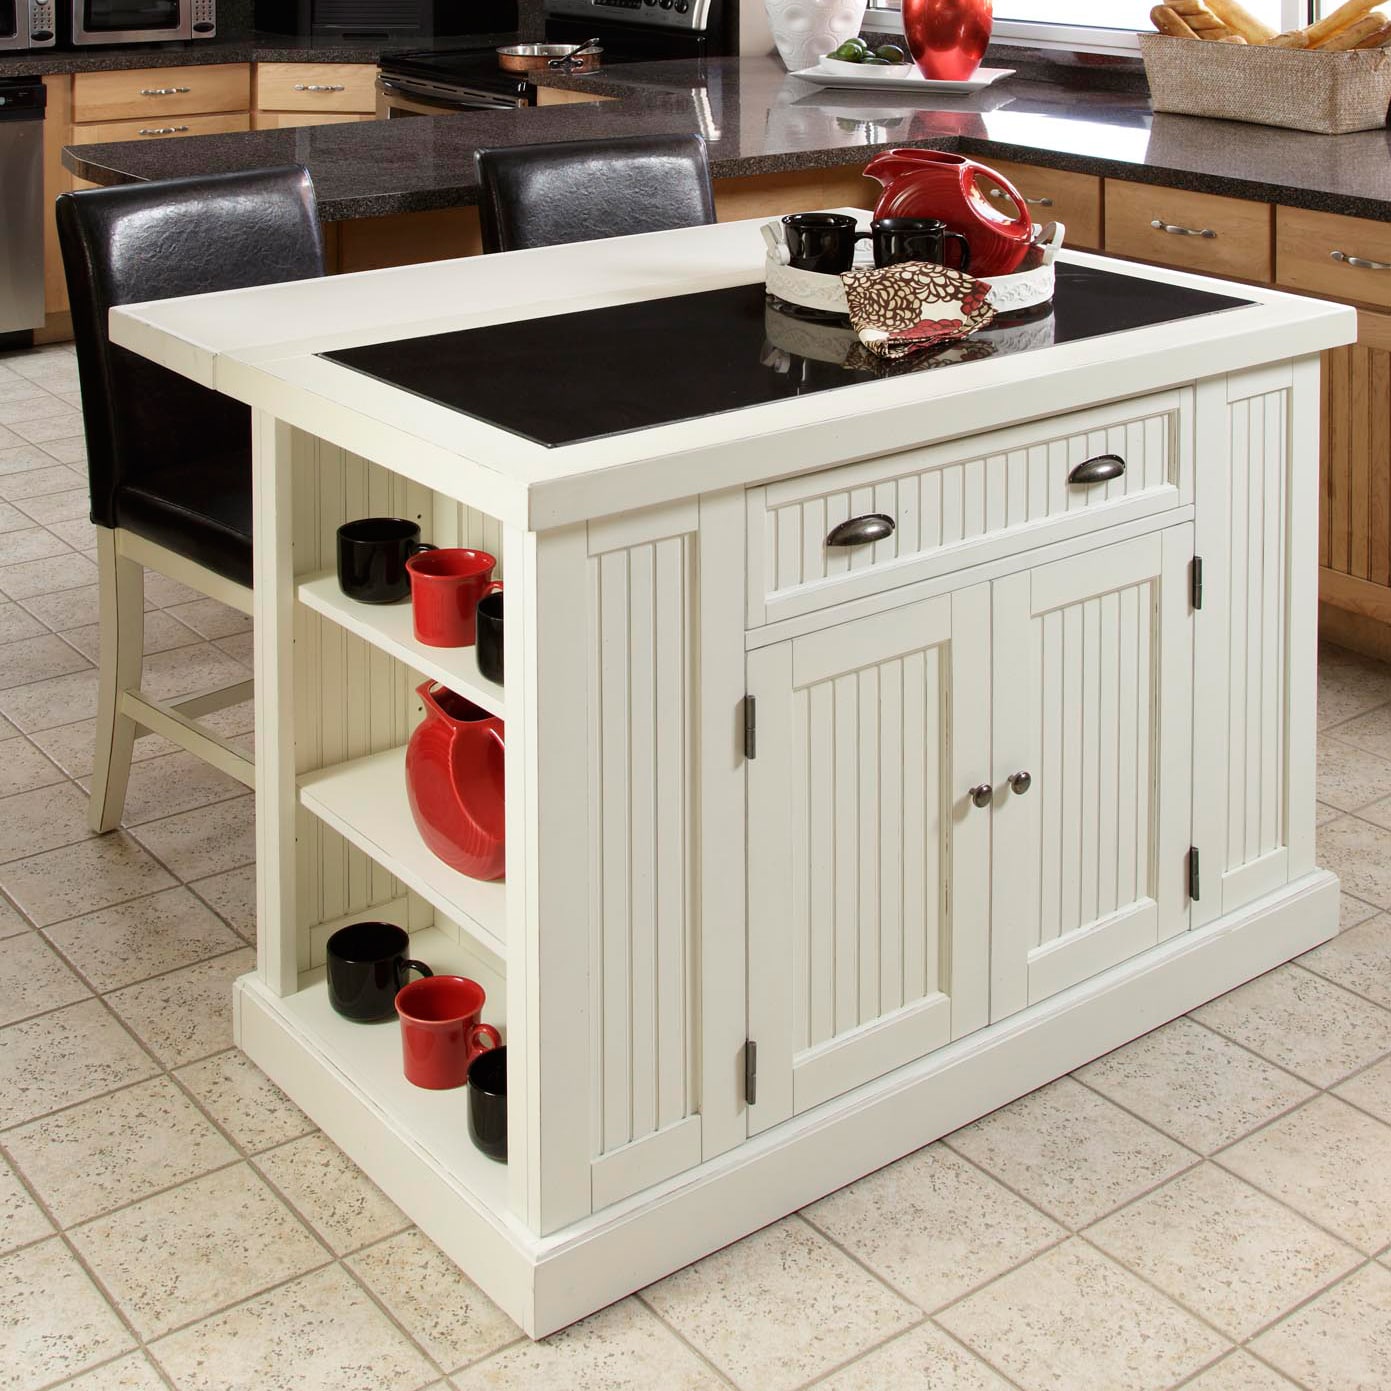   finish kitchen island with two bar stools today $ 1162 99 